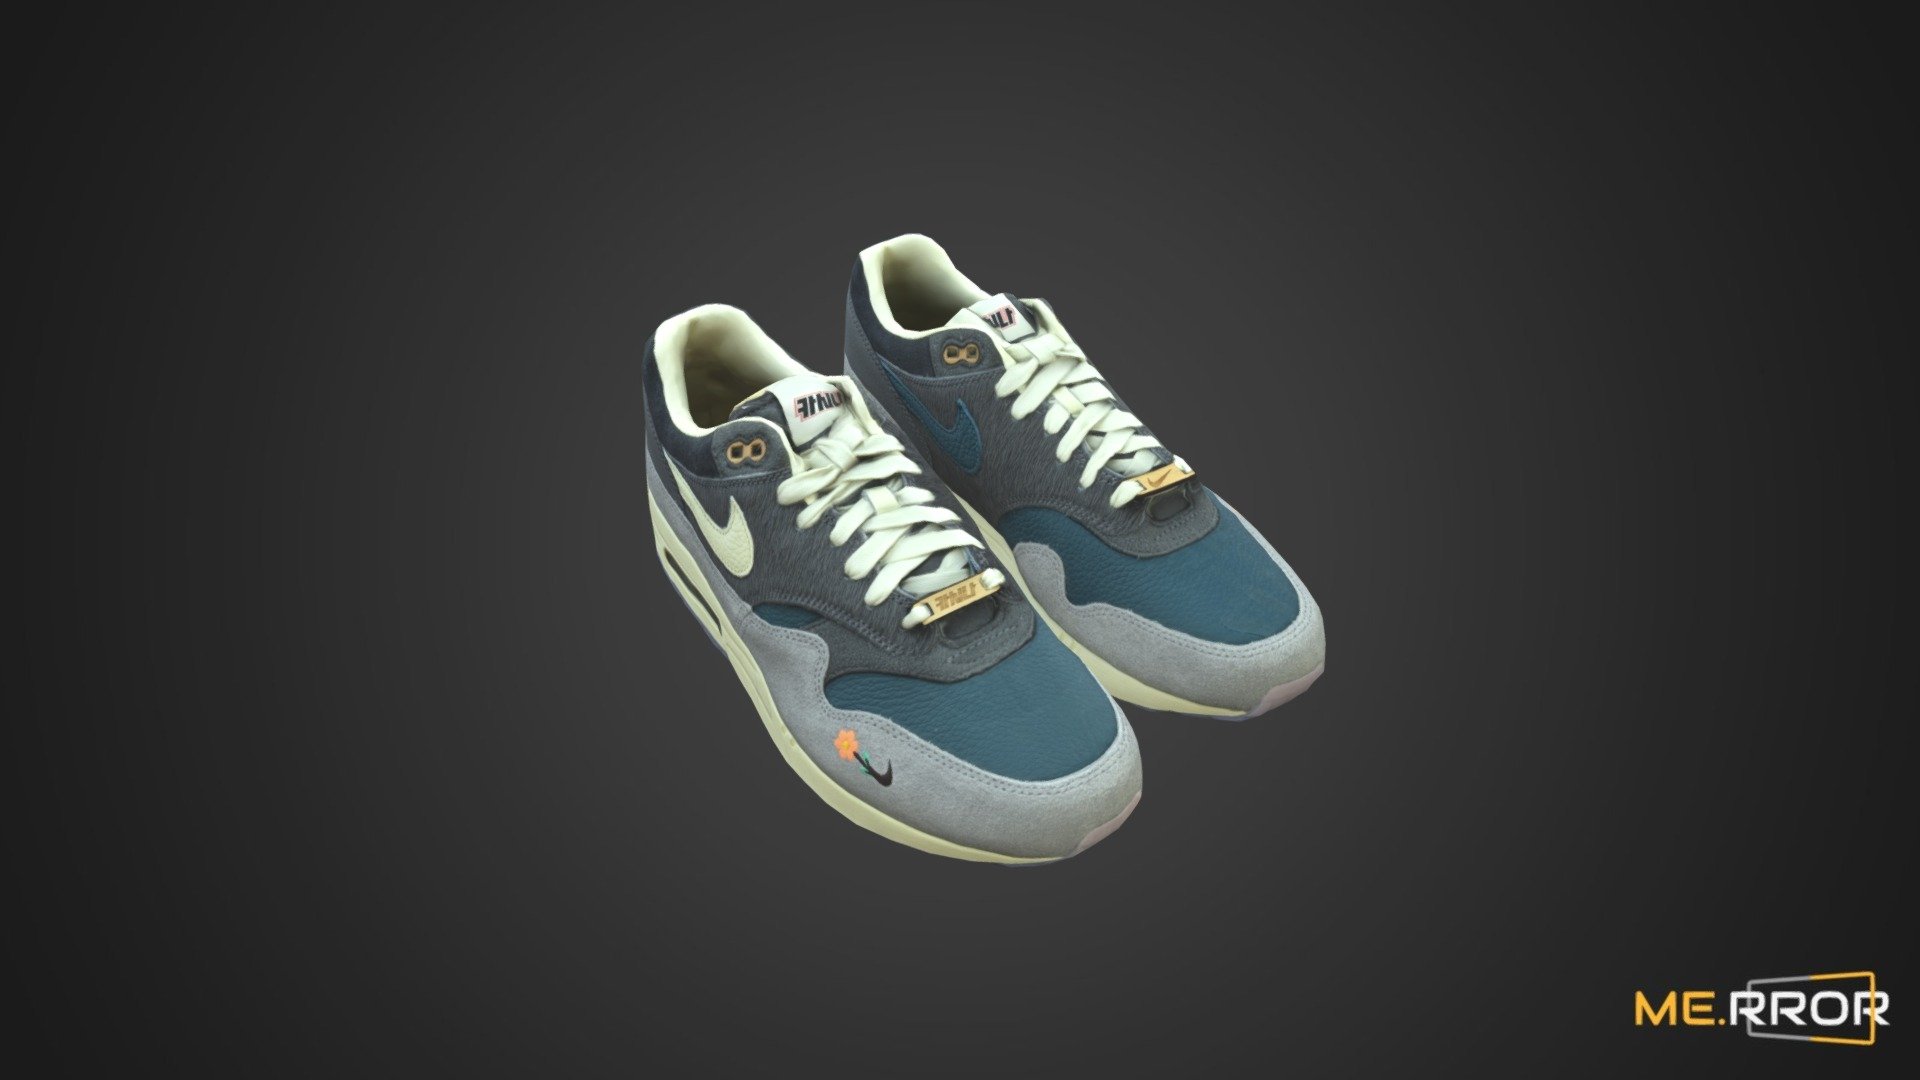 MERROR is a 3D Content PLATFORM which introduces various Asian assets to the 3D world


3DScanning #Photogrametry #ME.RROR - [Game-Ready] Nike Casina Shoes - Buy Royalty Free 3D model by ME.RROR (@merror) 3d model